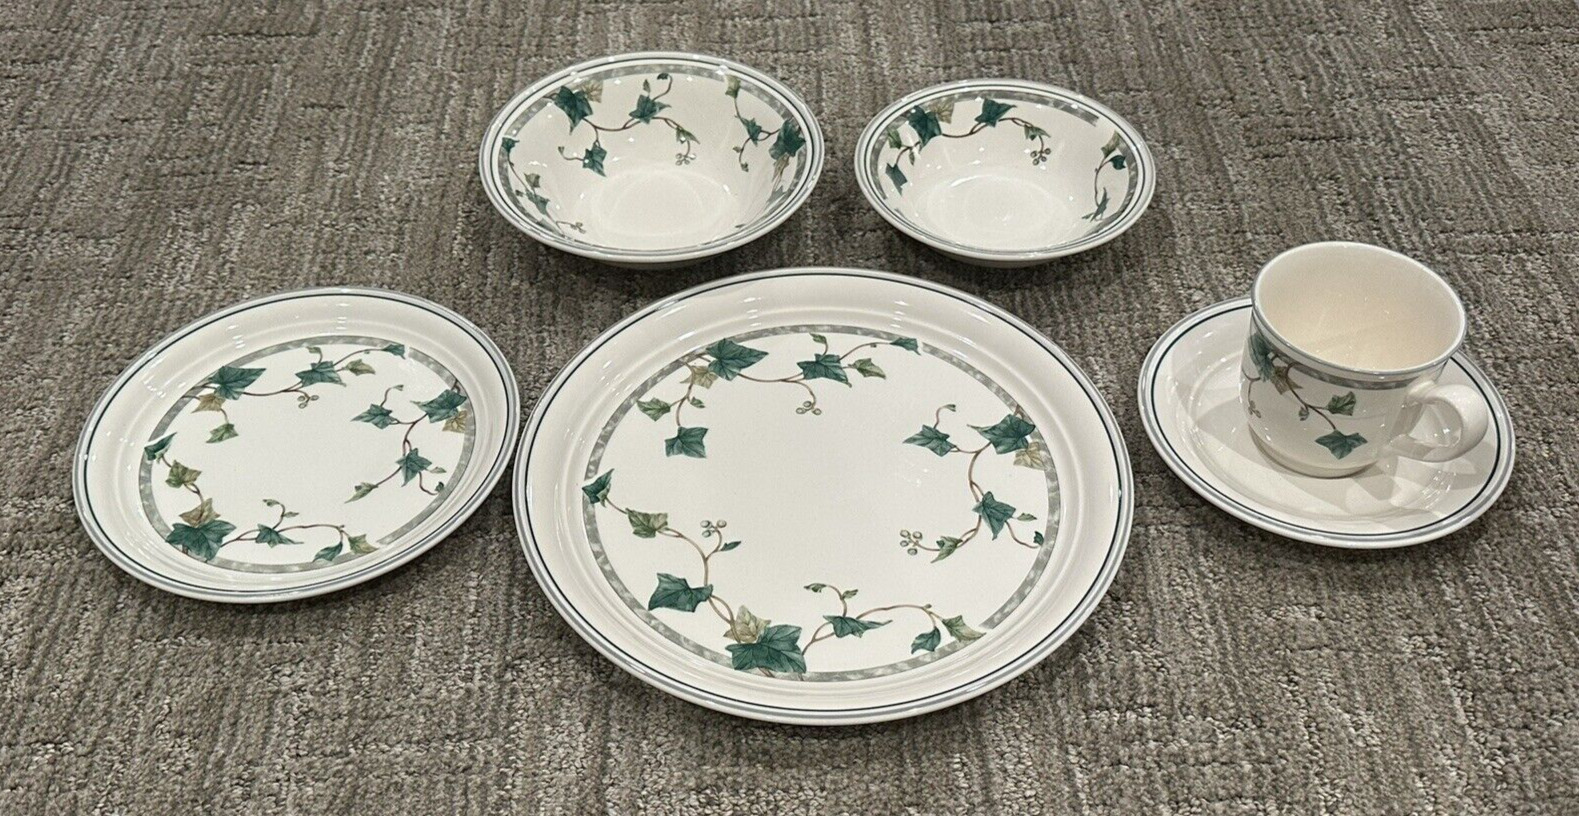 NORITAKE IVY LANE 6 PC PLACE SETTING DINNER & BREAD PLATES BOWLS CUP SAUCER LN